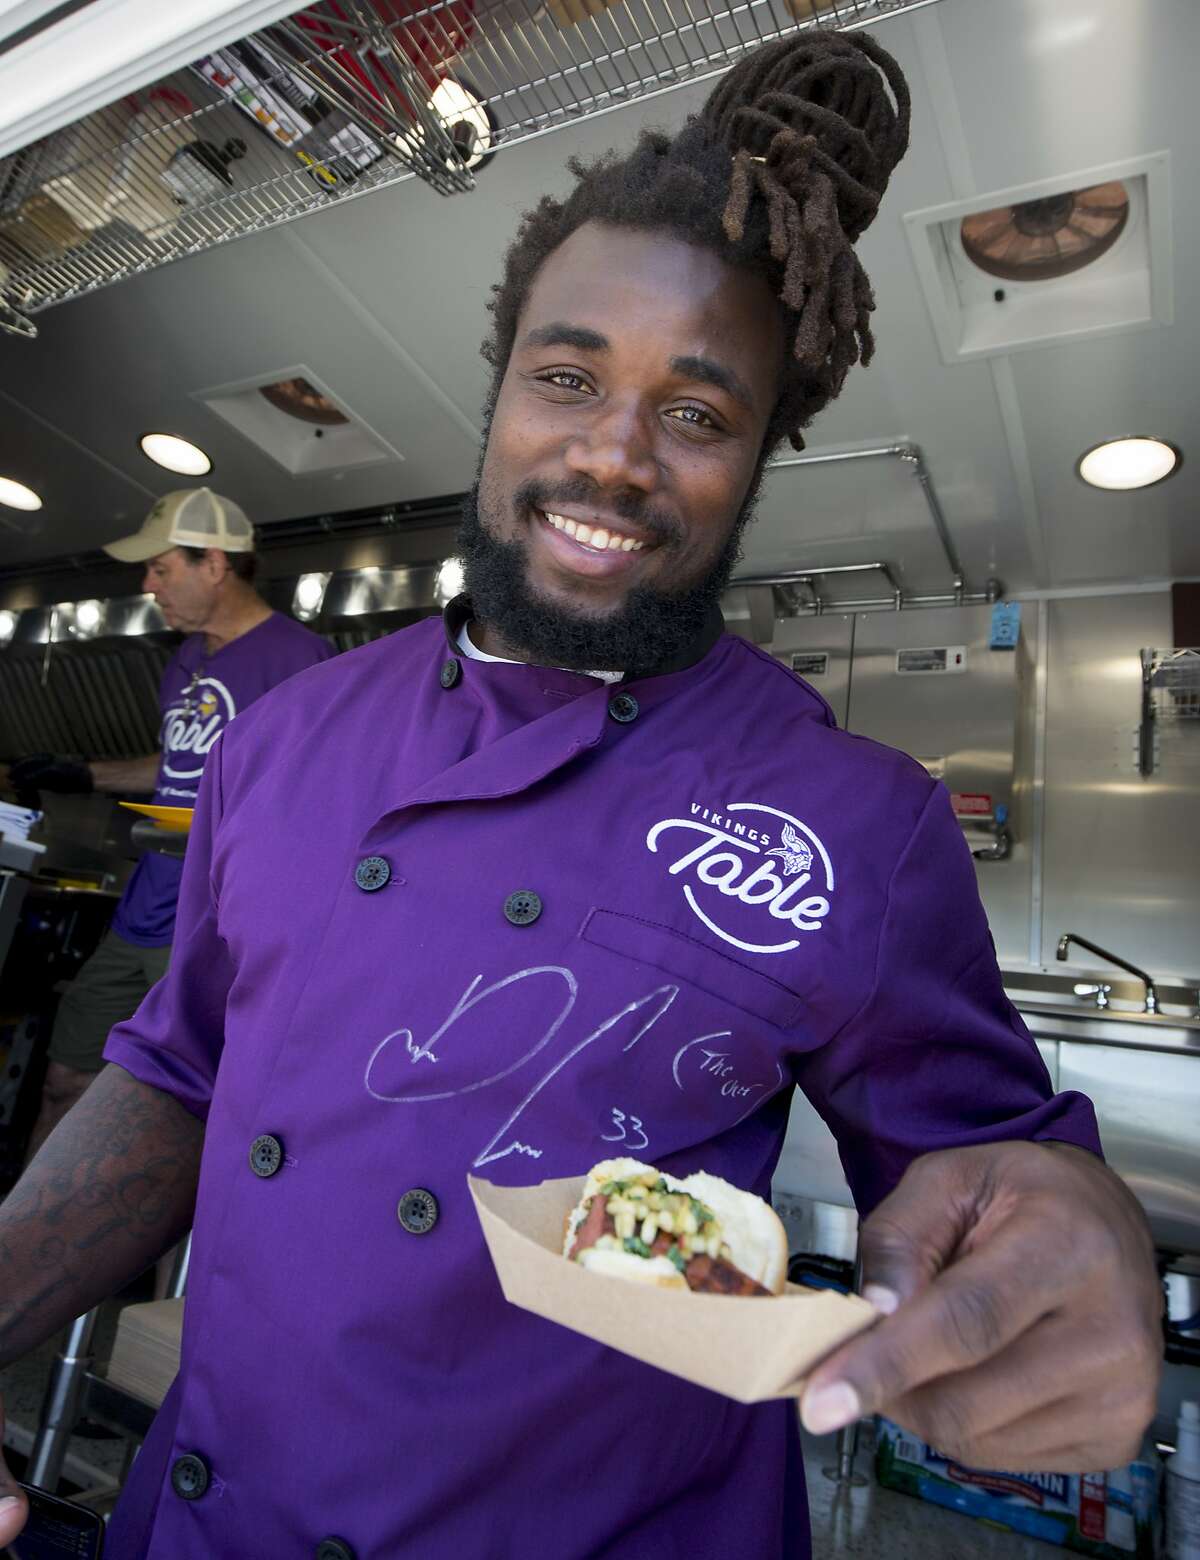 Minnesota Vikings running back Dalvin Cook serves food from the Vikings Table, a food truck that will serve free healthy meals to kids in need this summer, at the team's NFL football training facility in Eagan, Minn., Thursday, June 13, 2019. (AP Photo/Andy Clayton- King)